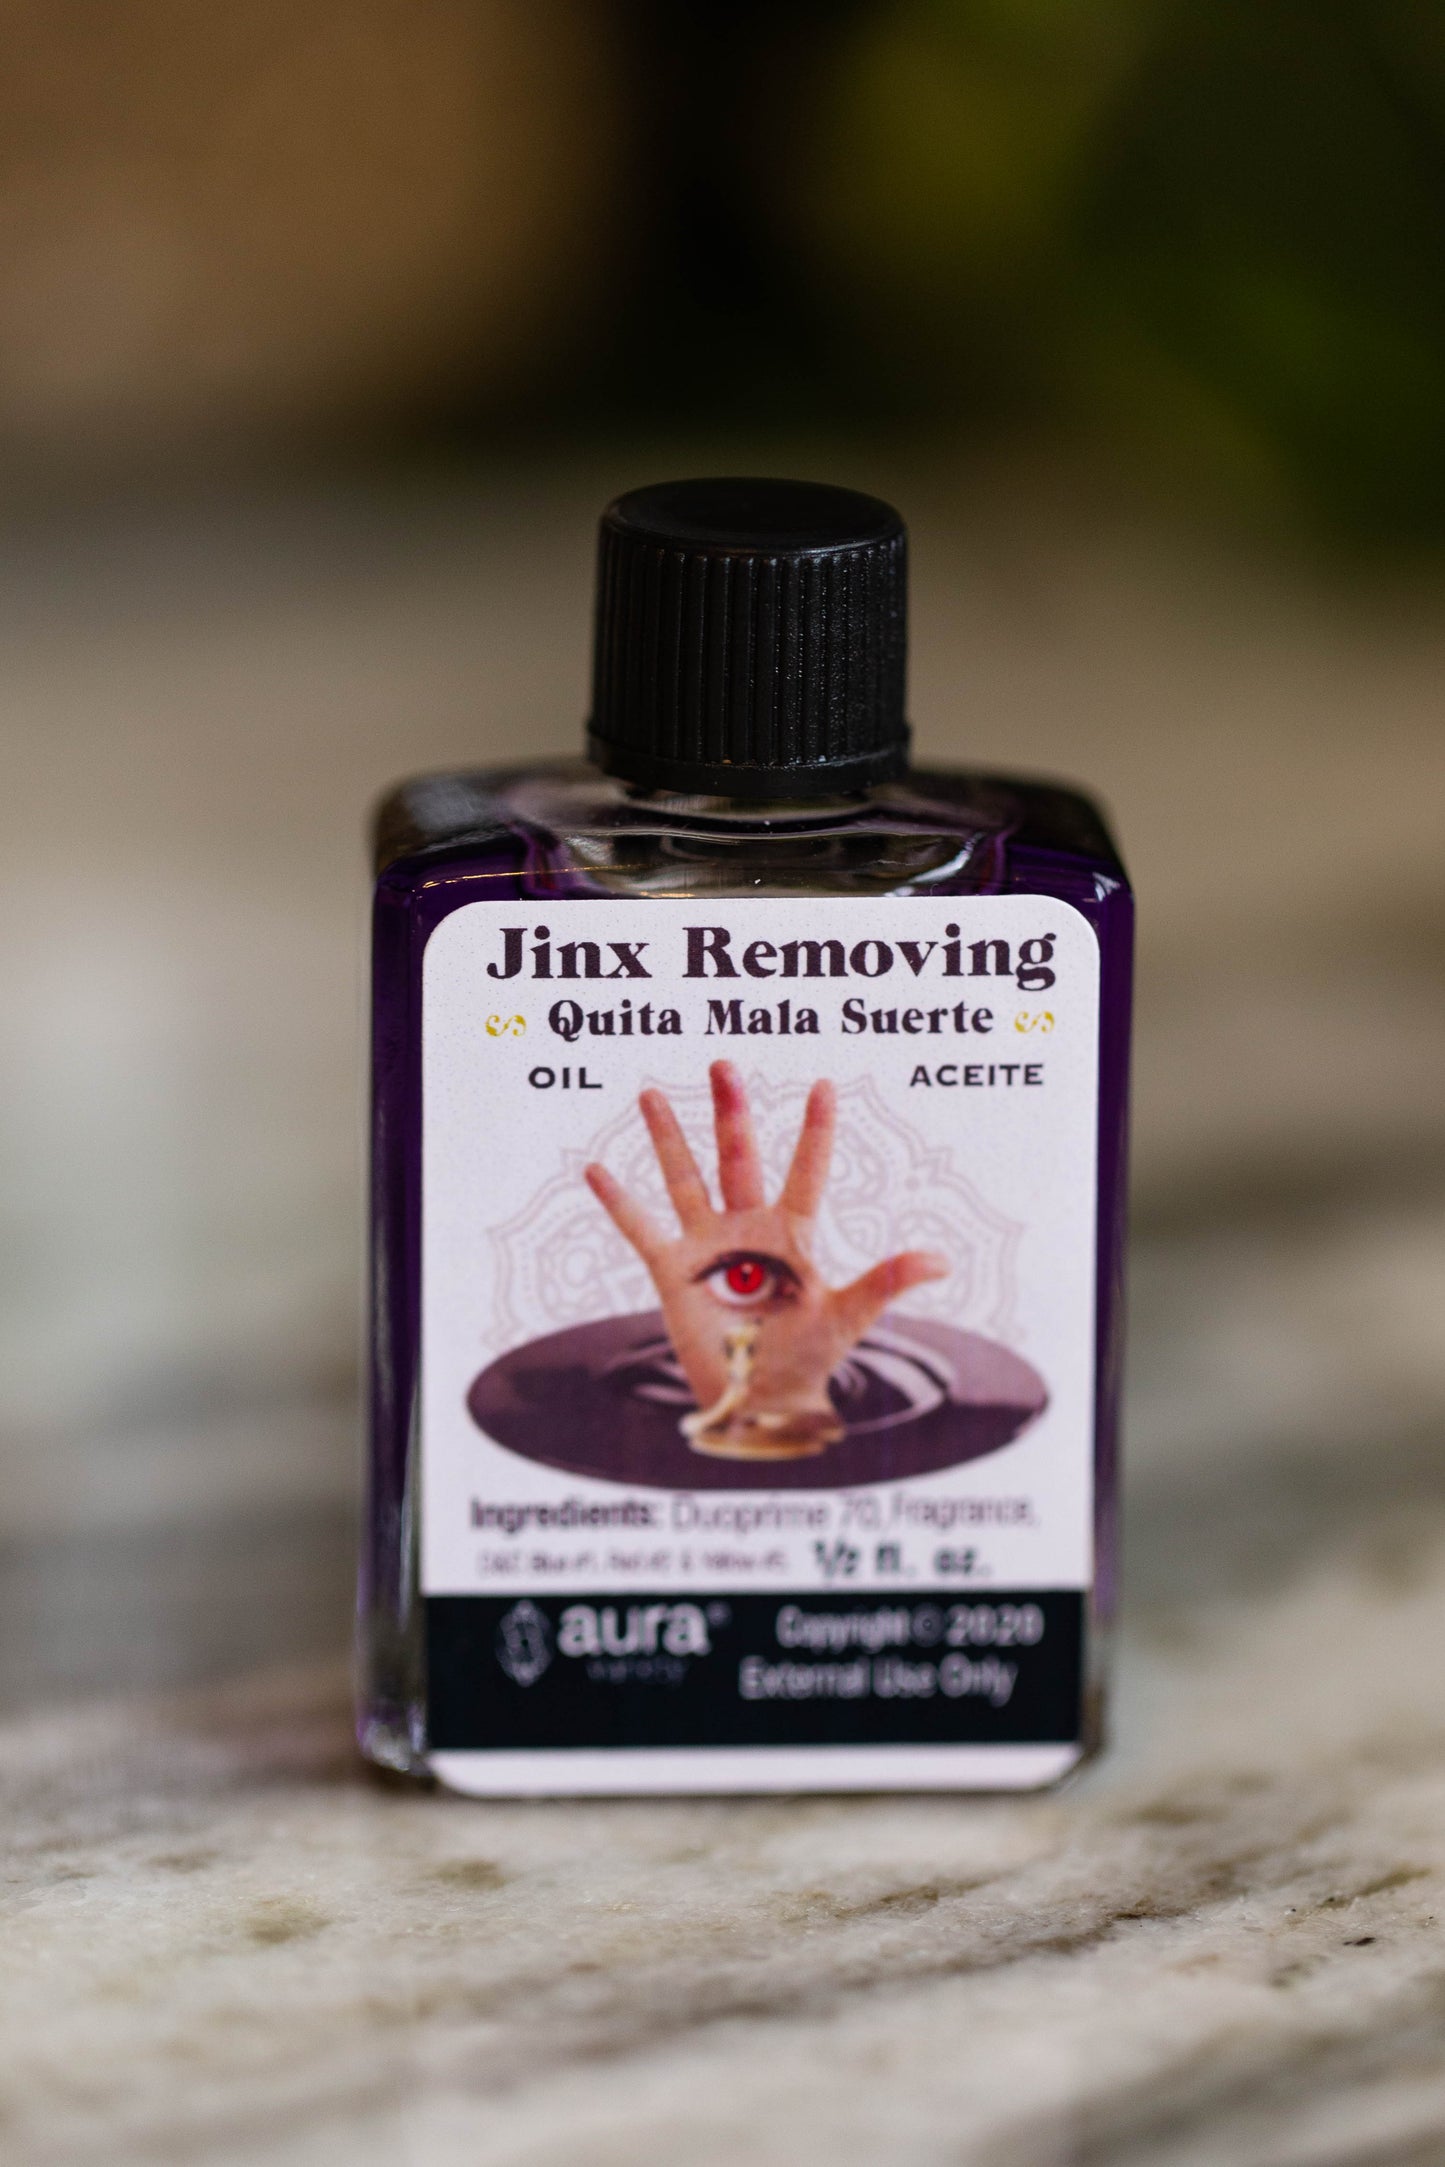 JINX REMOVING Conjure Oil for removing jinxes, curses, hexes, bad luck